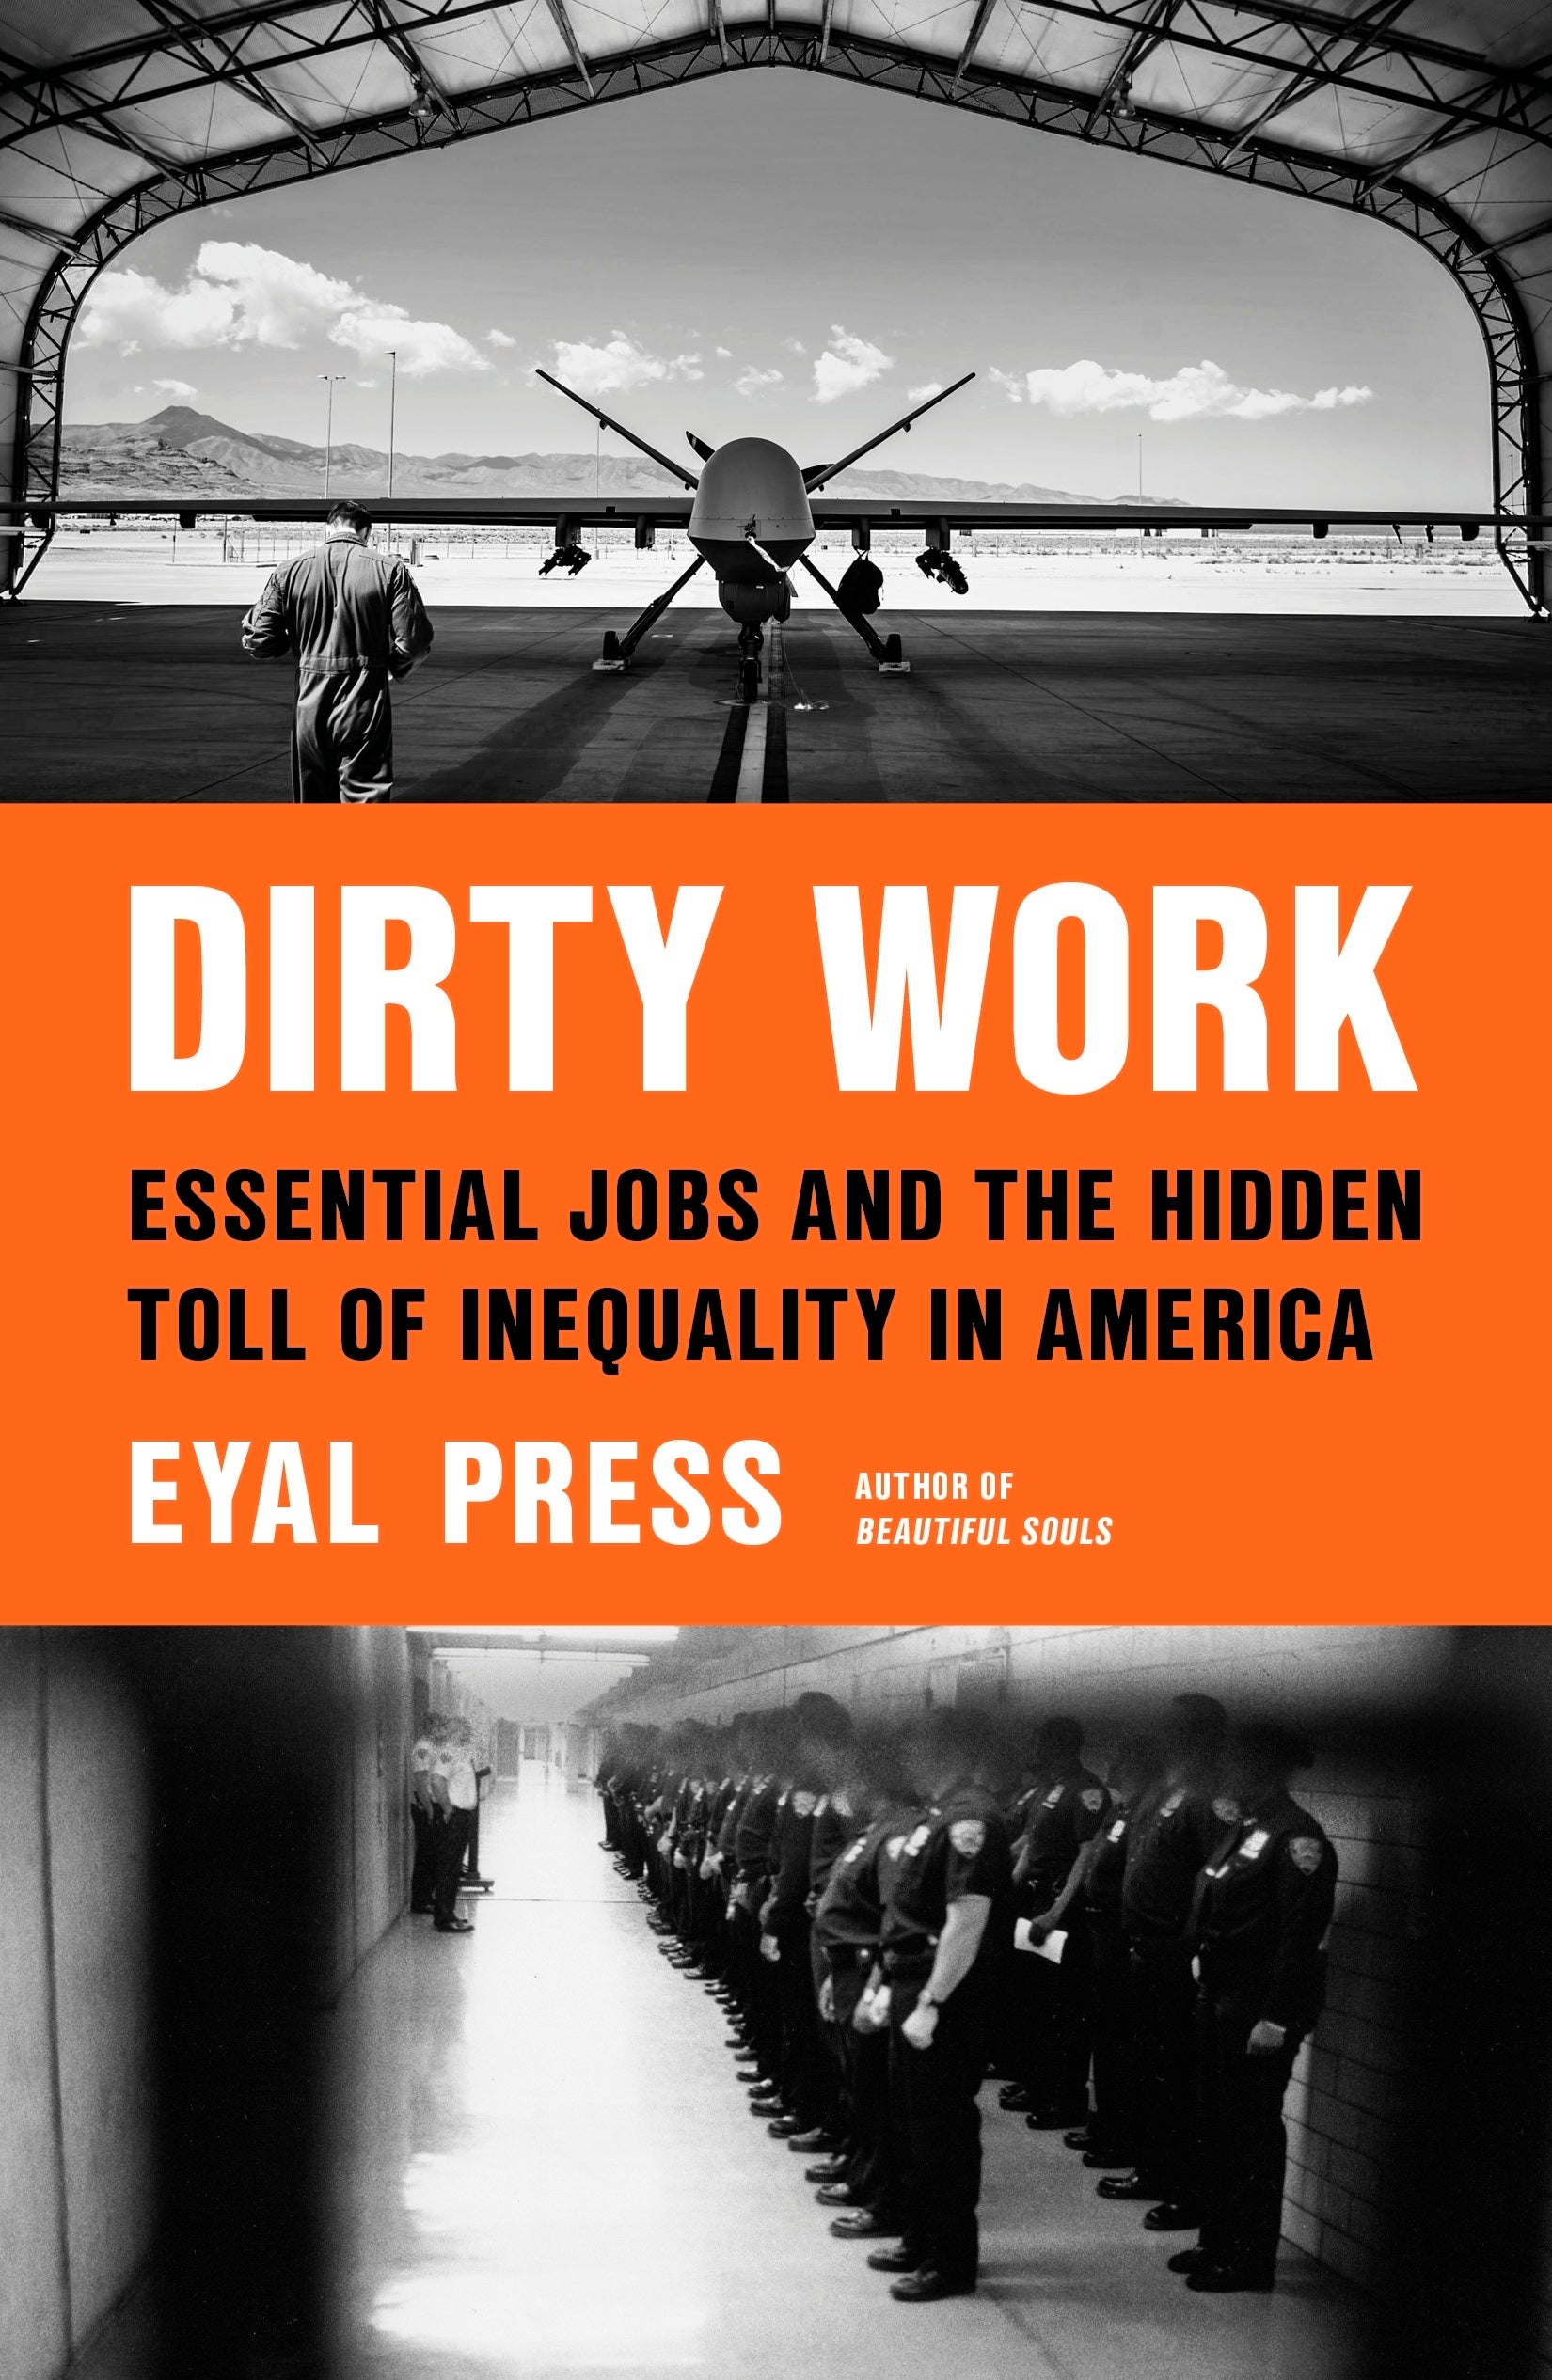 Book Review - Dirty Work